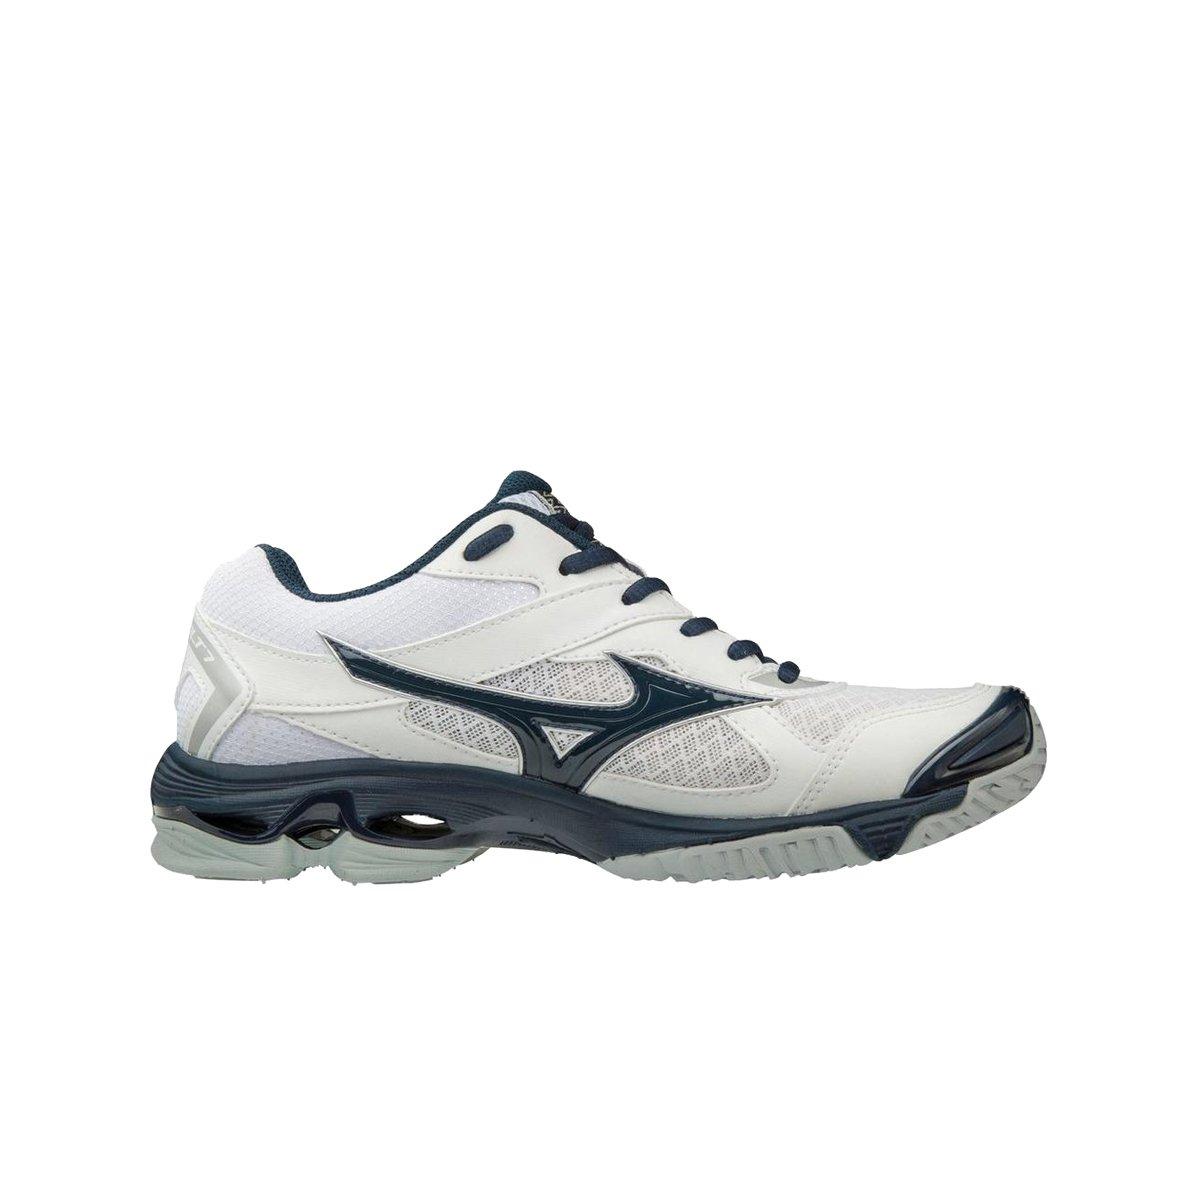 mizuno women's wave bolt 7 volleyball shoes